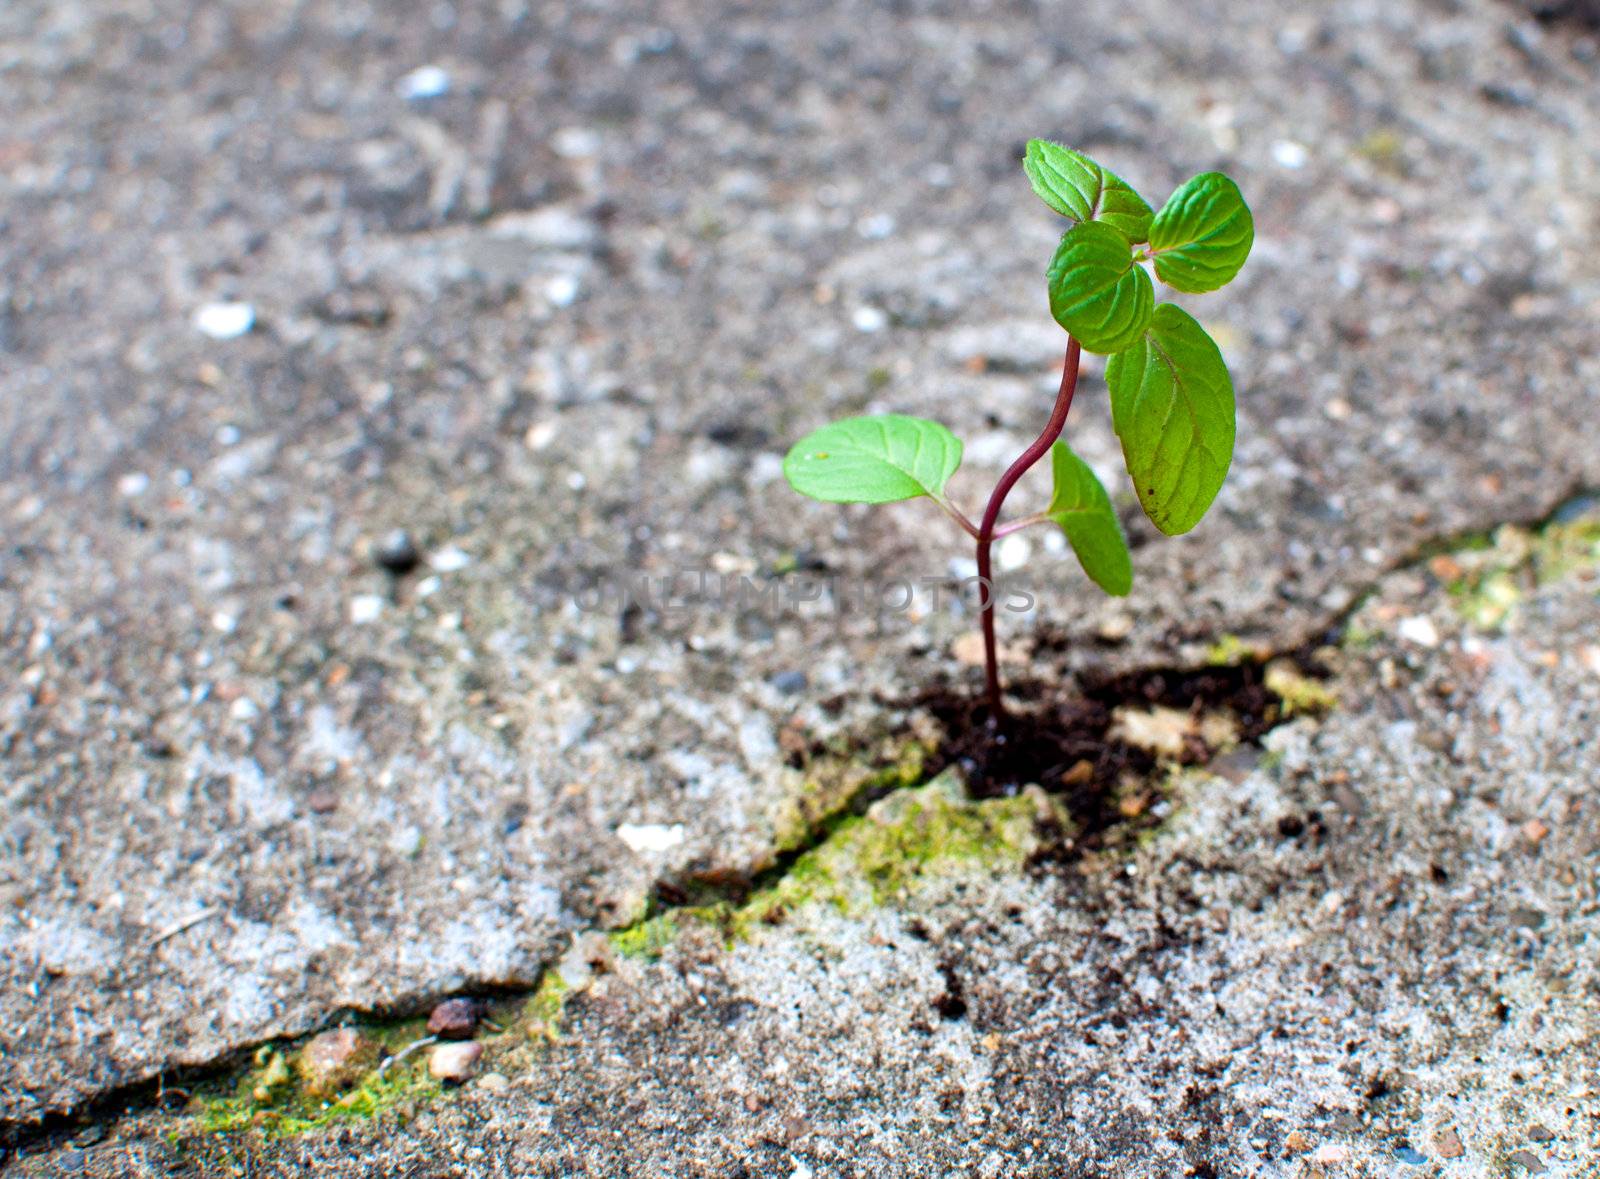 New life growing from concrete by unikpix